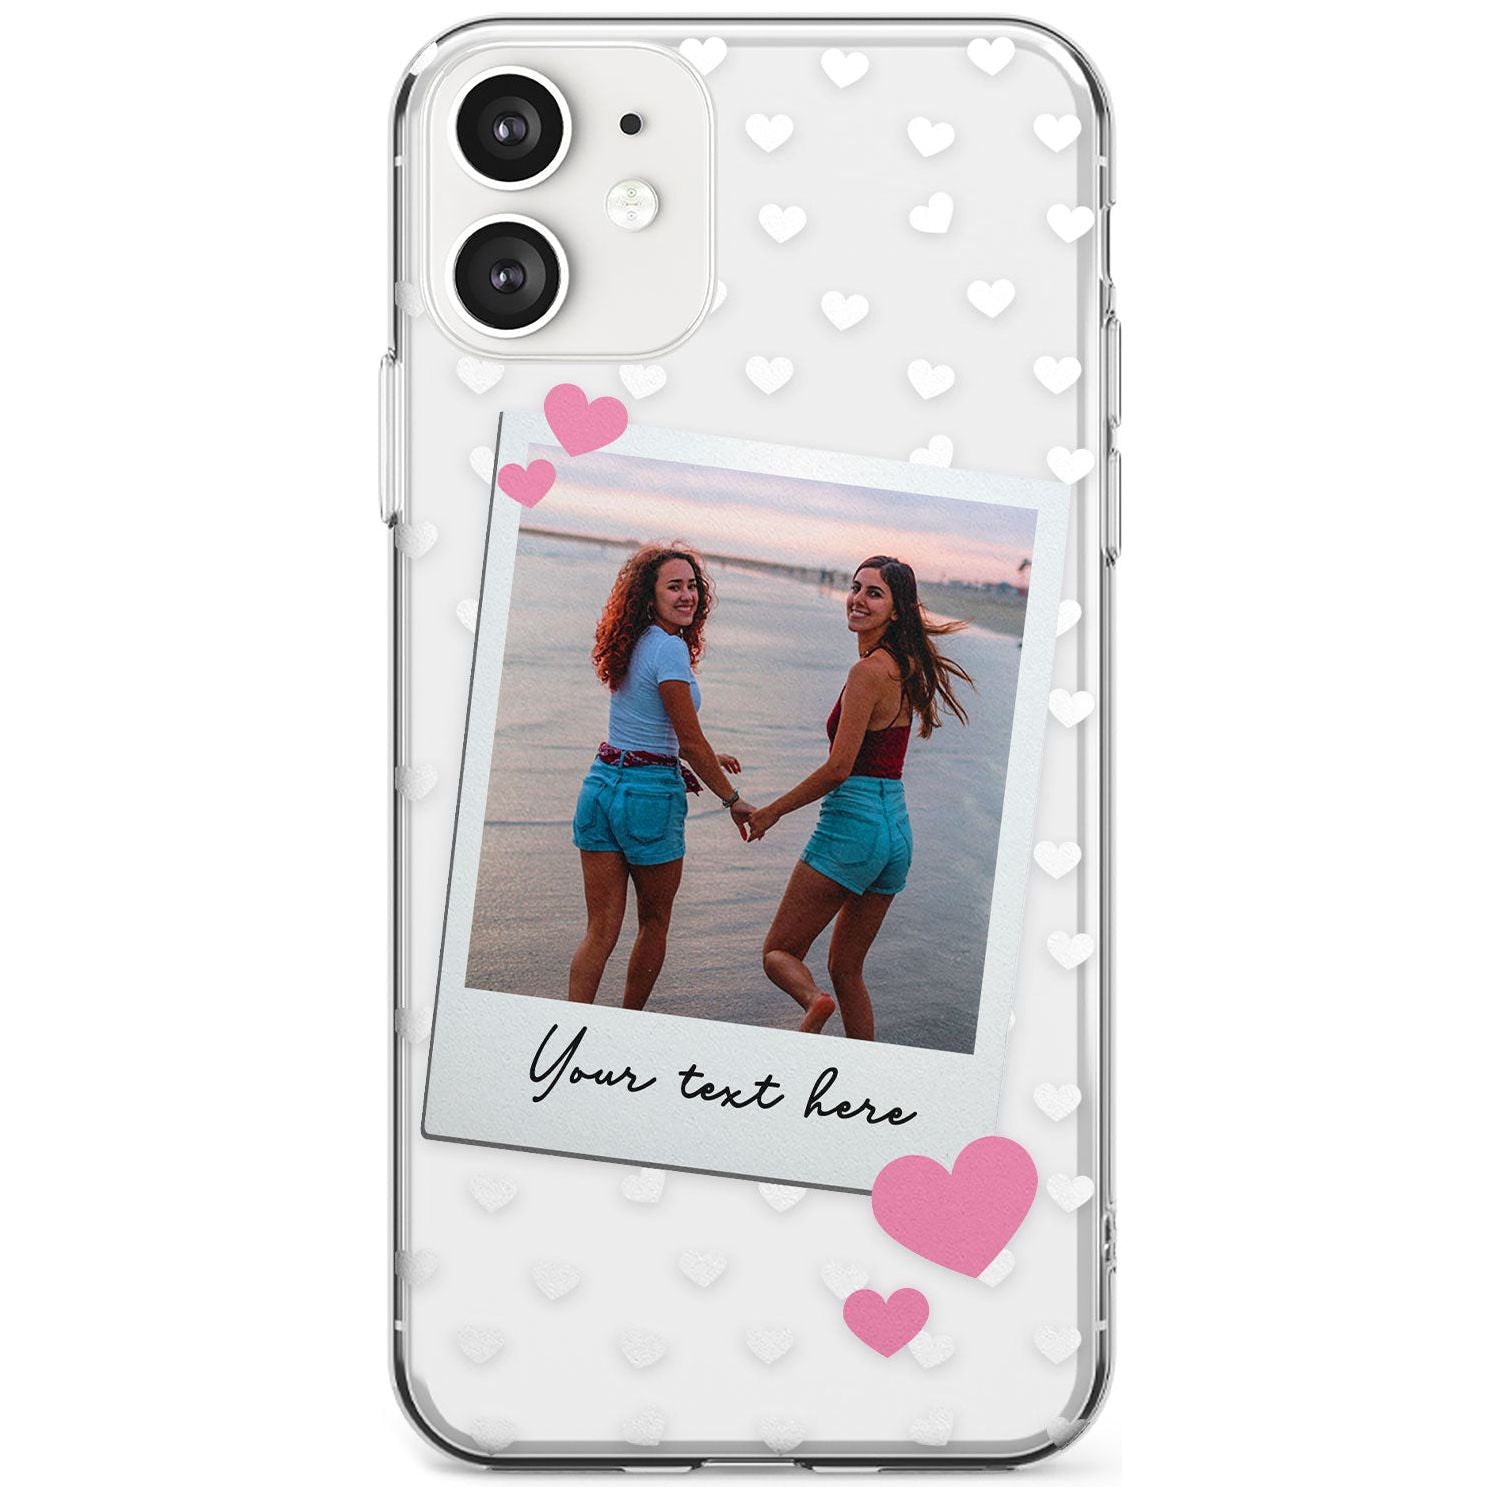 Instant Film & Hearts Black Impact Phone Case for iPhone 11